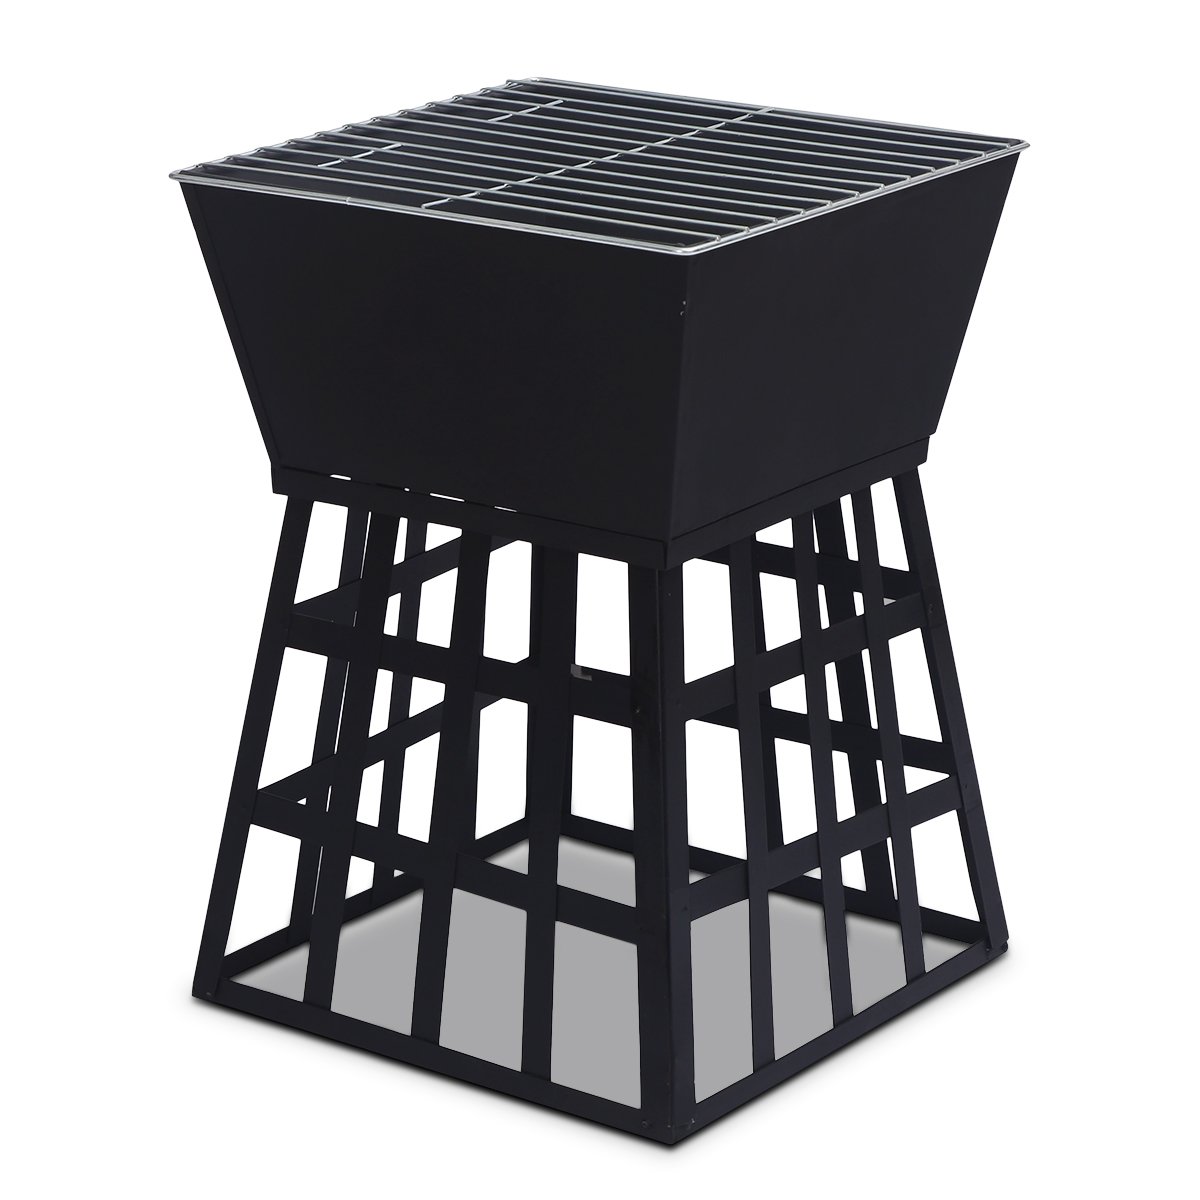 Outdoor Fire Pit for BBQ, Grilling, Cooking, Camping | Portable Brazier with Reversible Stand for Backyard | Brand: Wallaroo